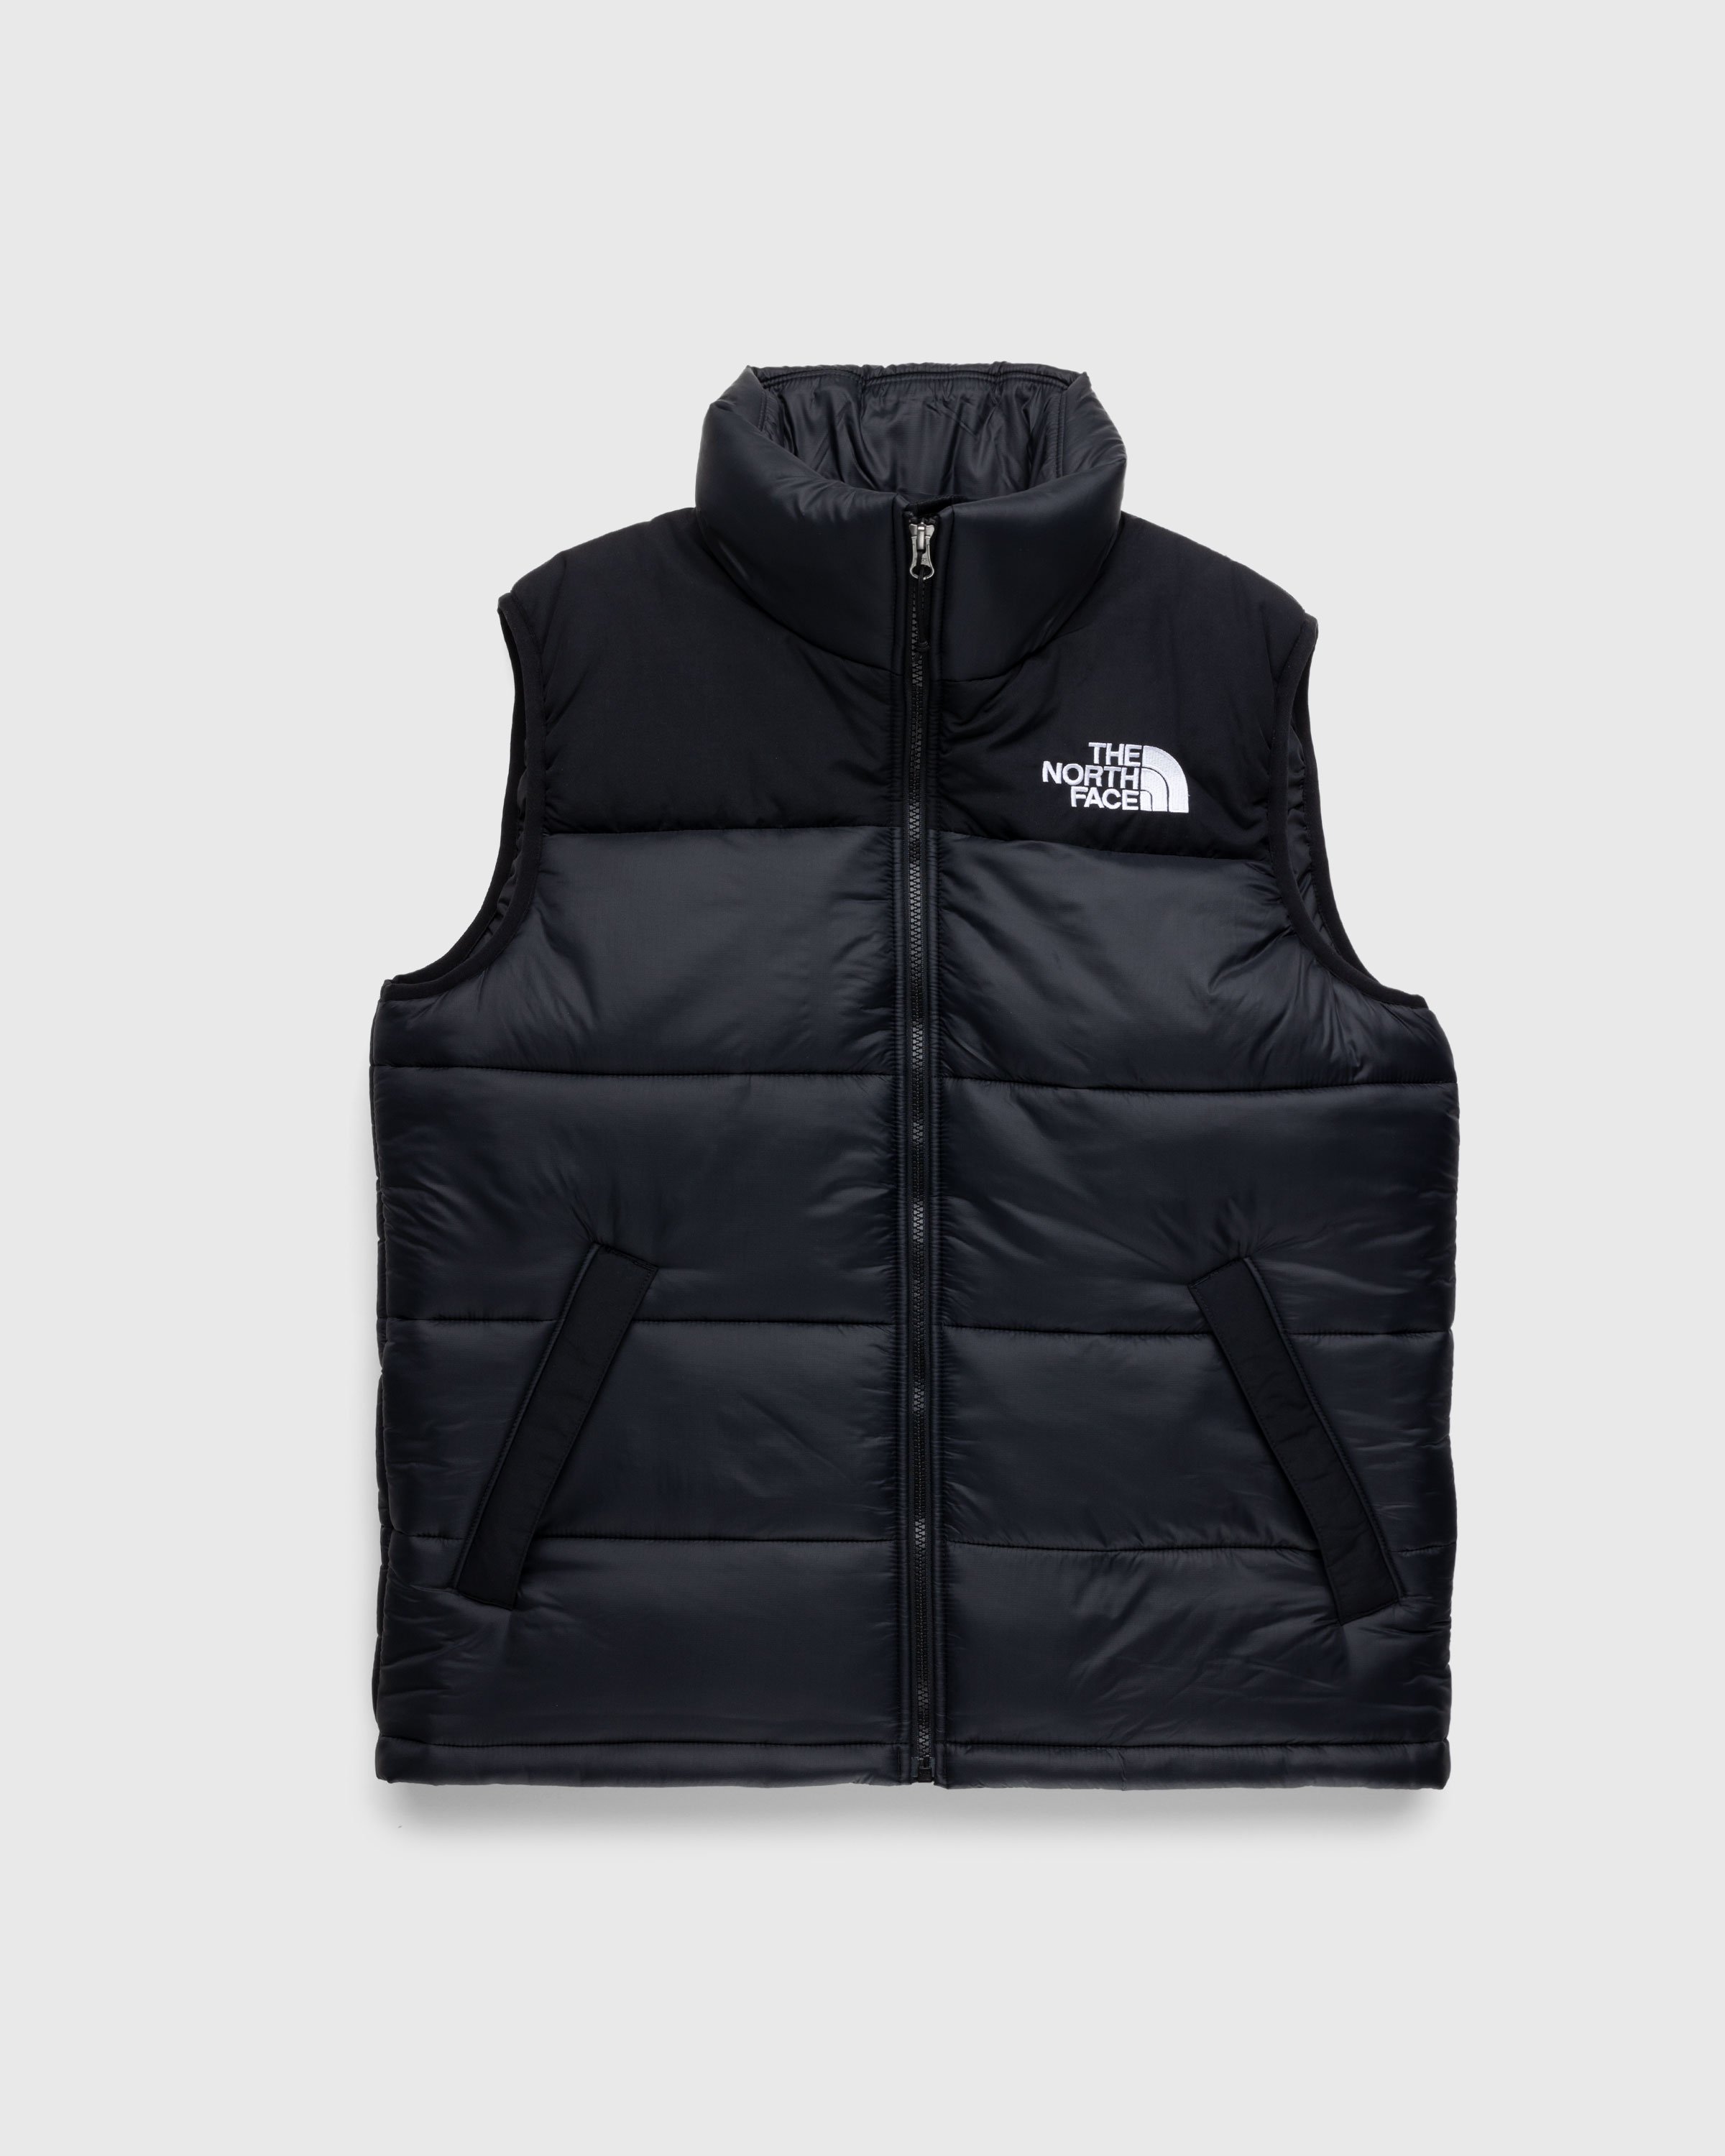 The North Face – Himalayan Synth Vest TNF Black | Highsnobiety Shop